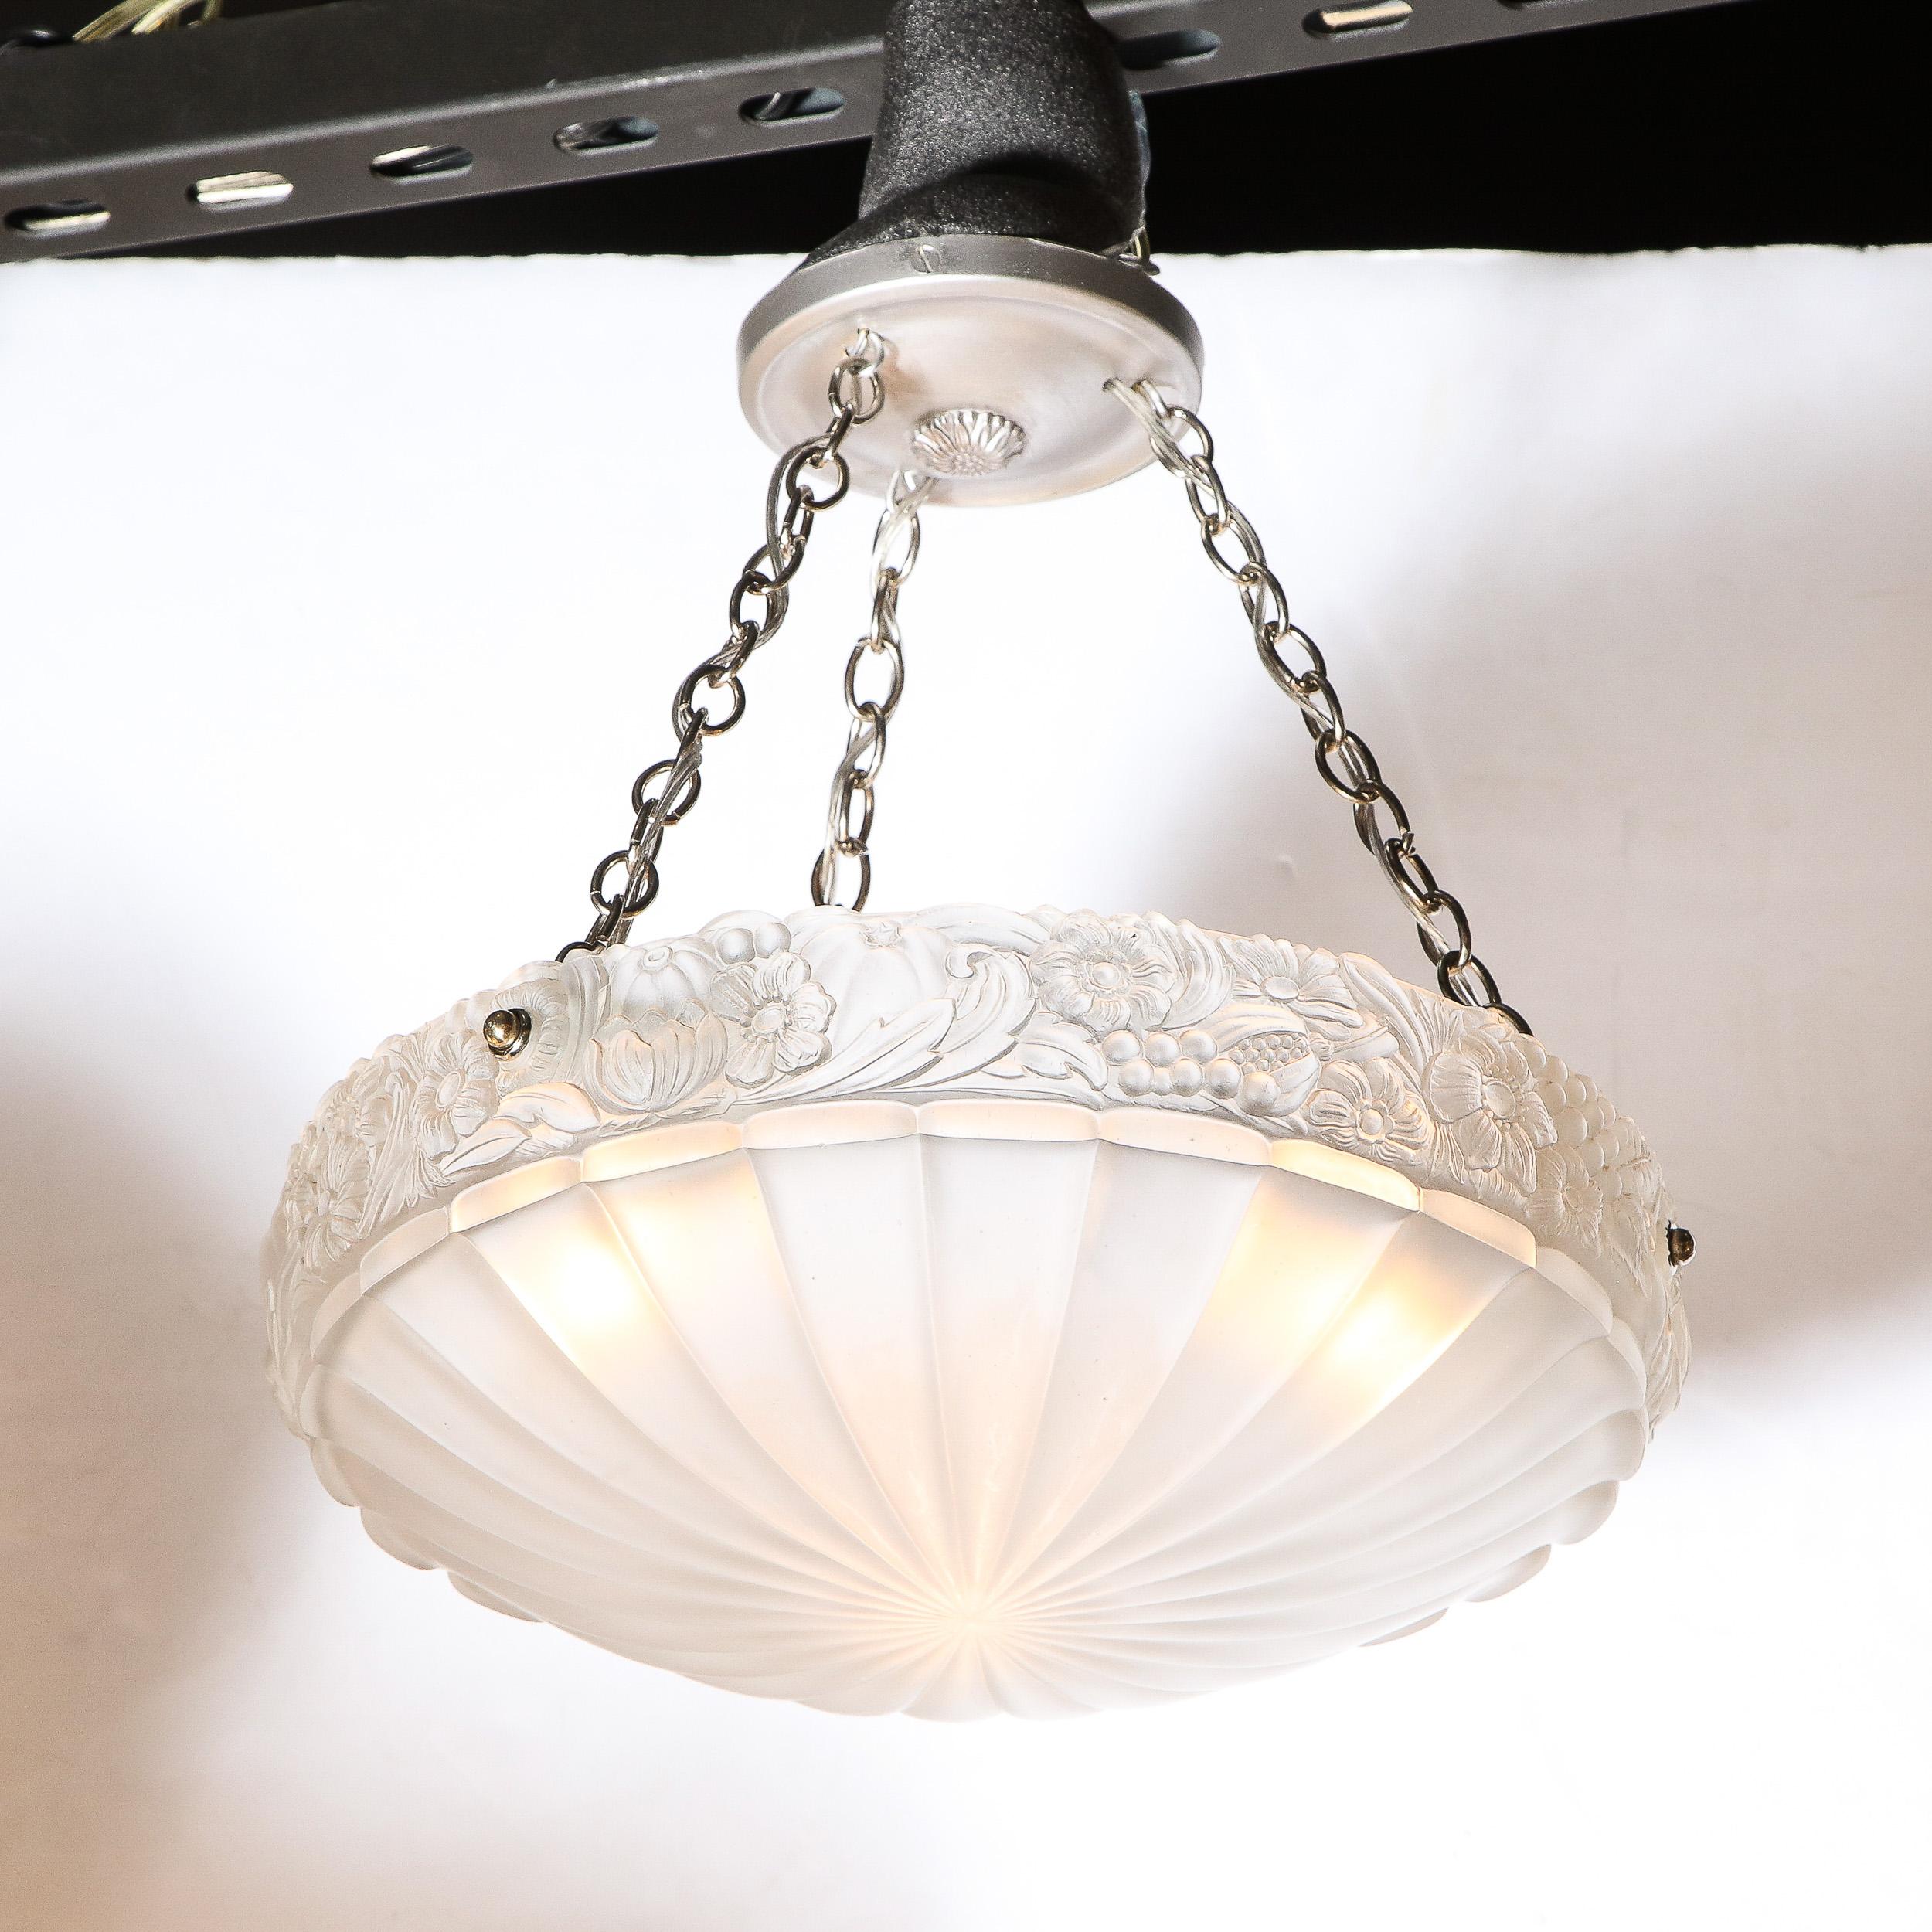 This stunning Art Deco chandelier was realized in France circa 1930. It features a concave domed shade with a channeled starburst bottom composed of an abundance of rays emanating outward from a central point. The glass sides of the shades have been